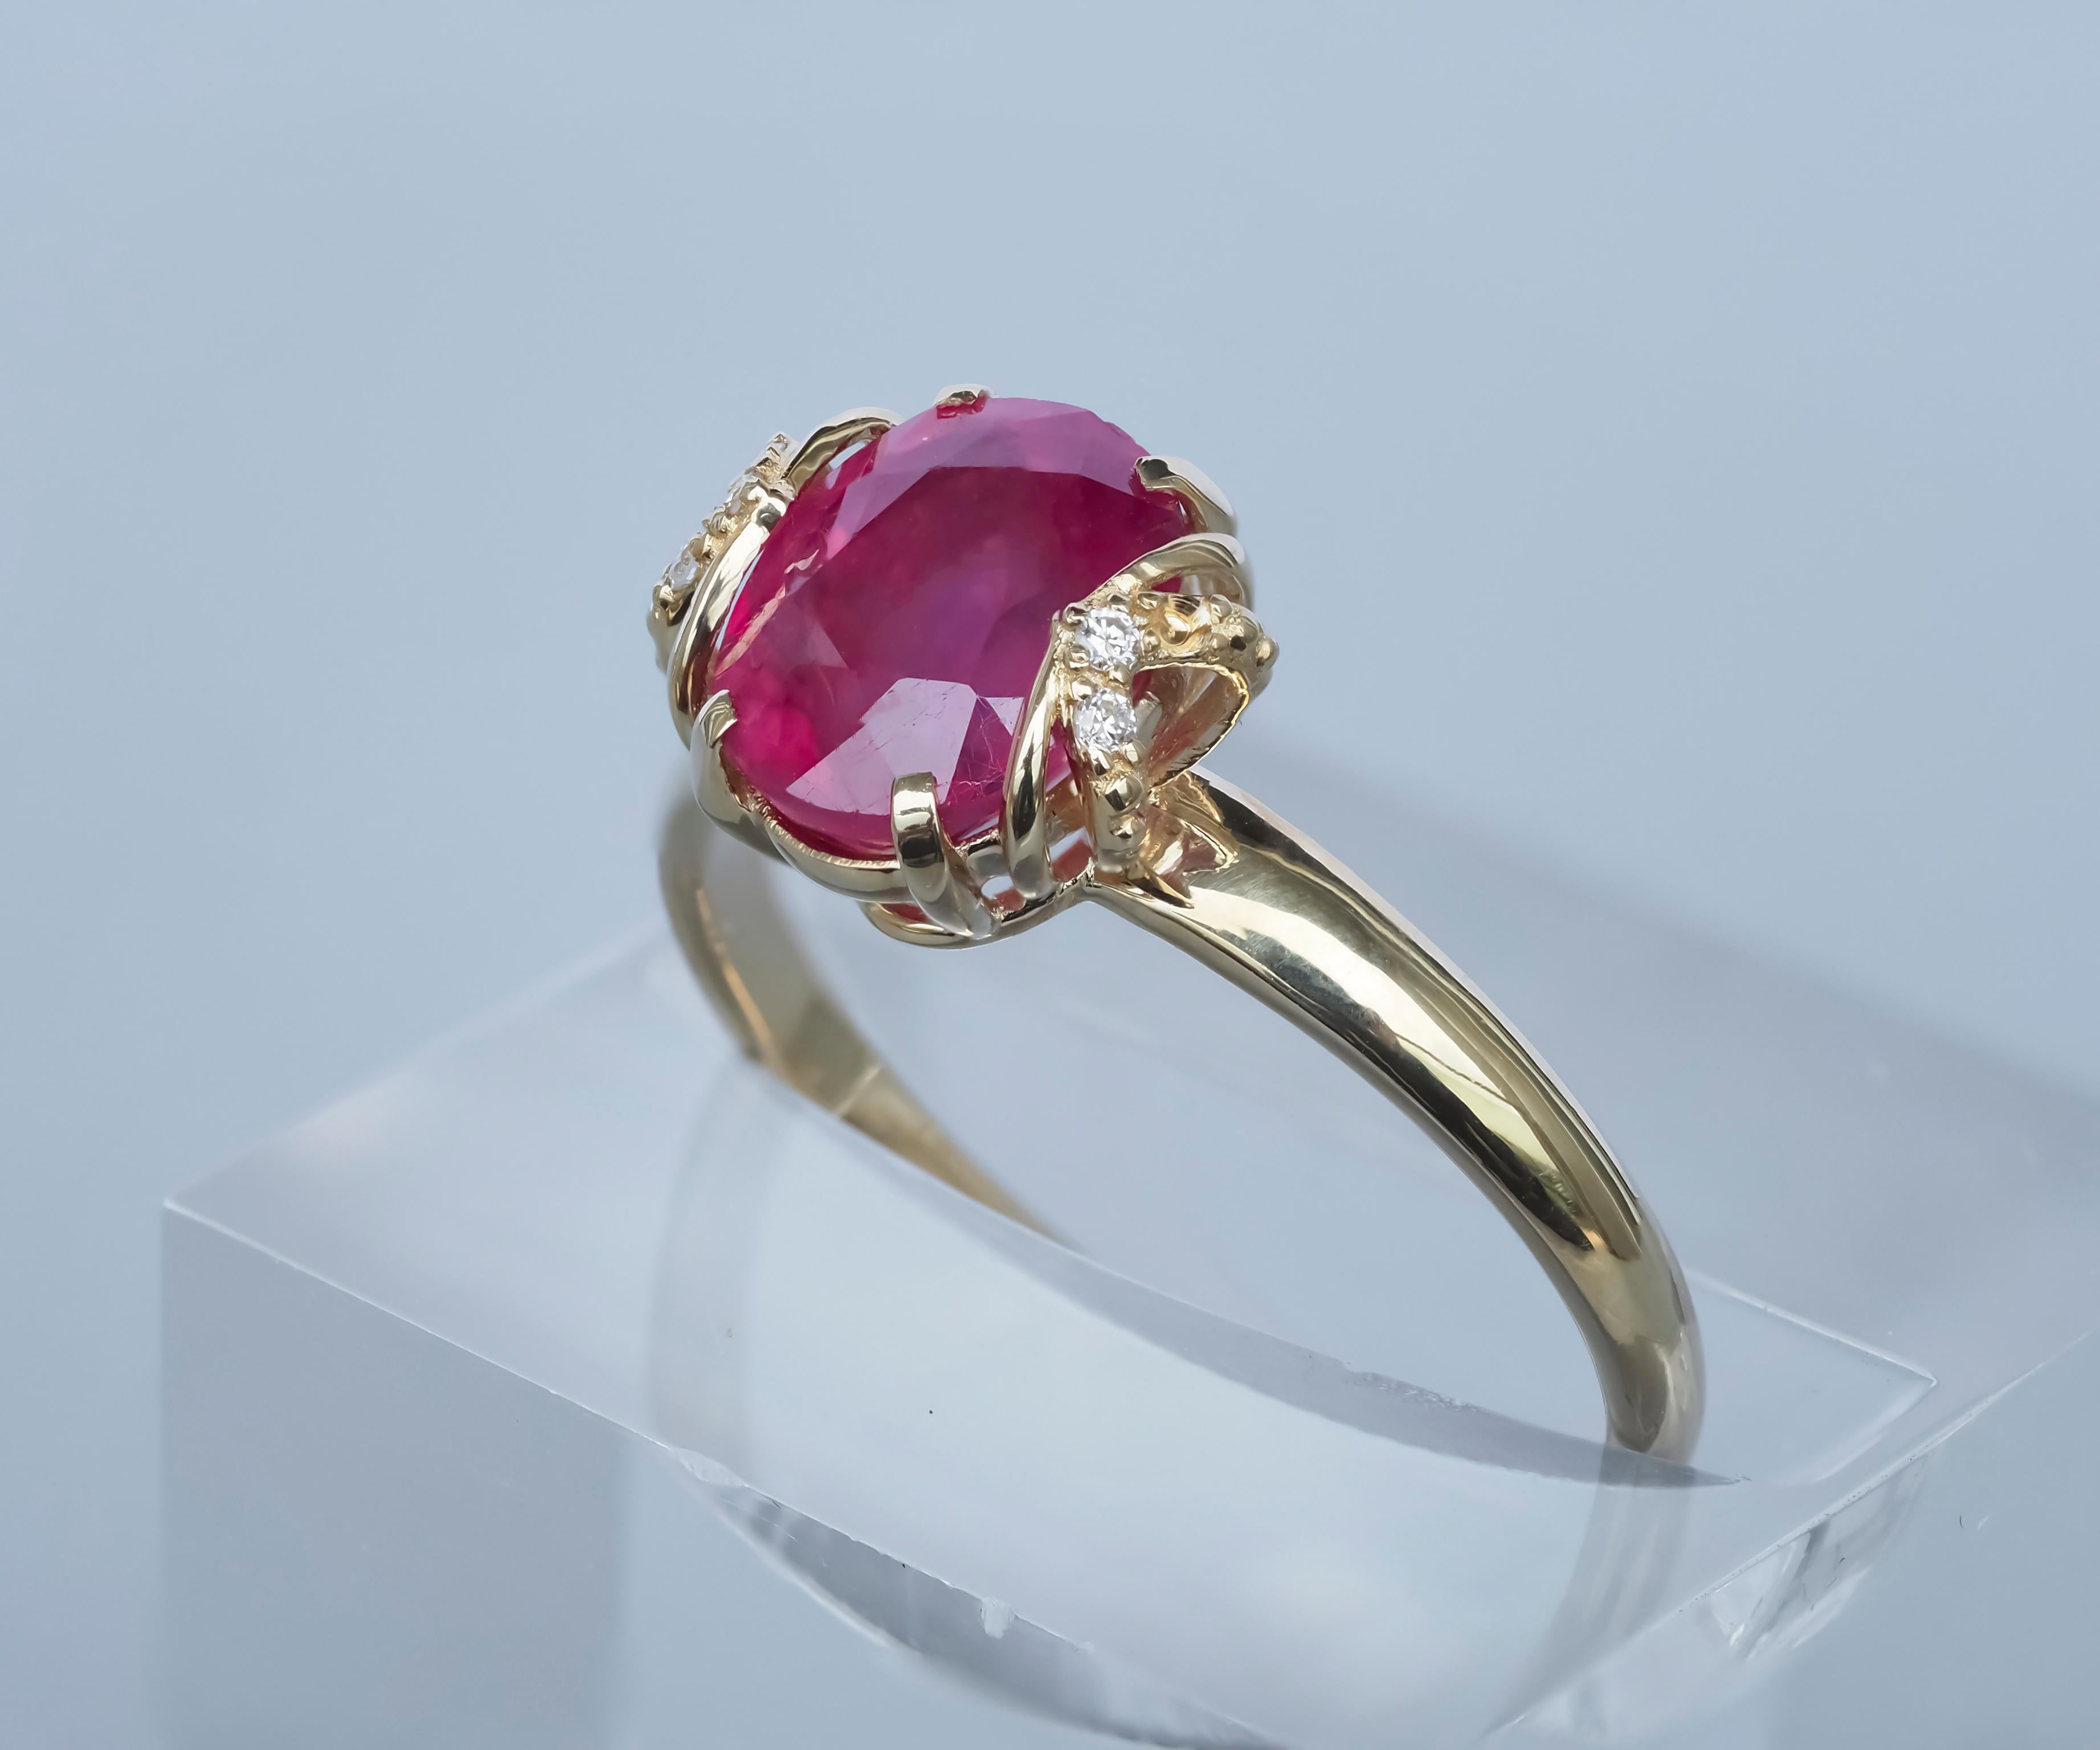 14 Karat Gold Ring with Ruby and Diamonds, Oval Ruby Ring 6